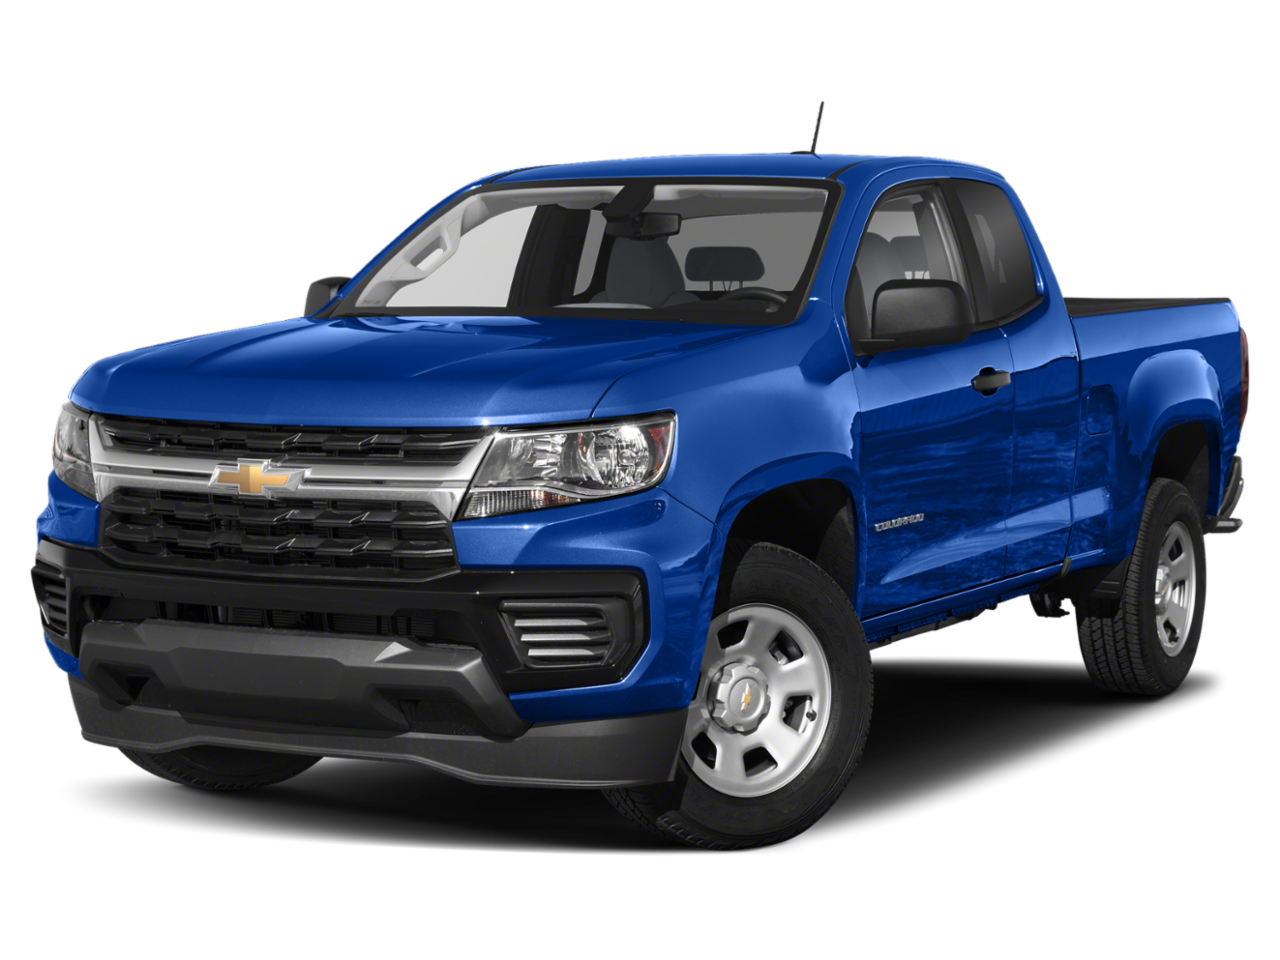 New 2021 Chevrolet Colorado For Sale With Lt Z71 Zr2 And More From